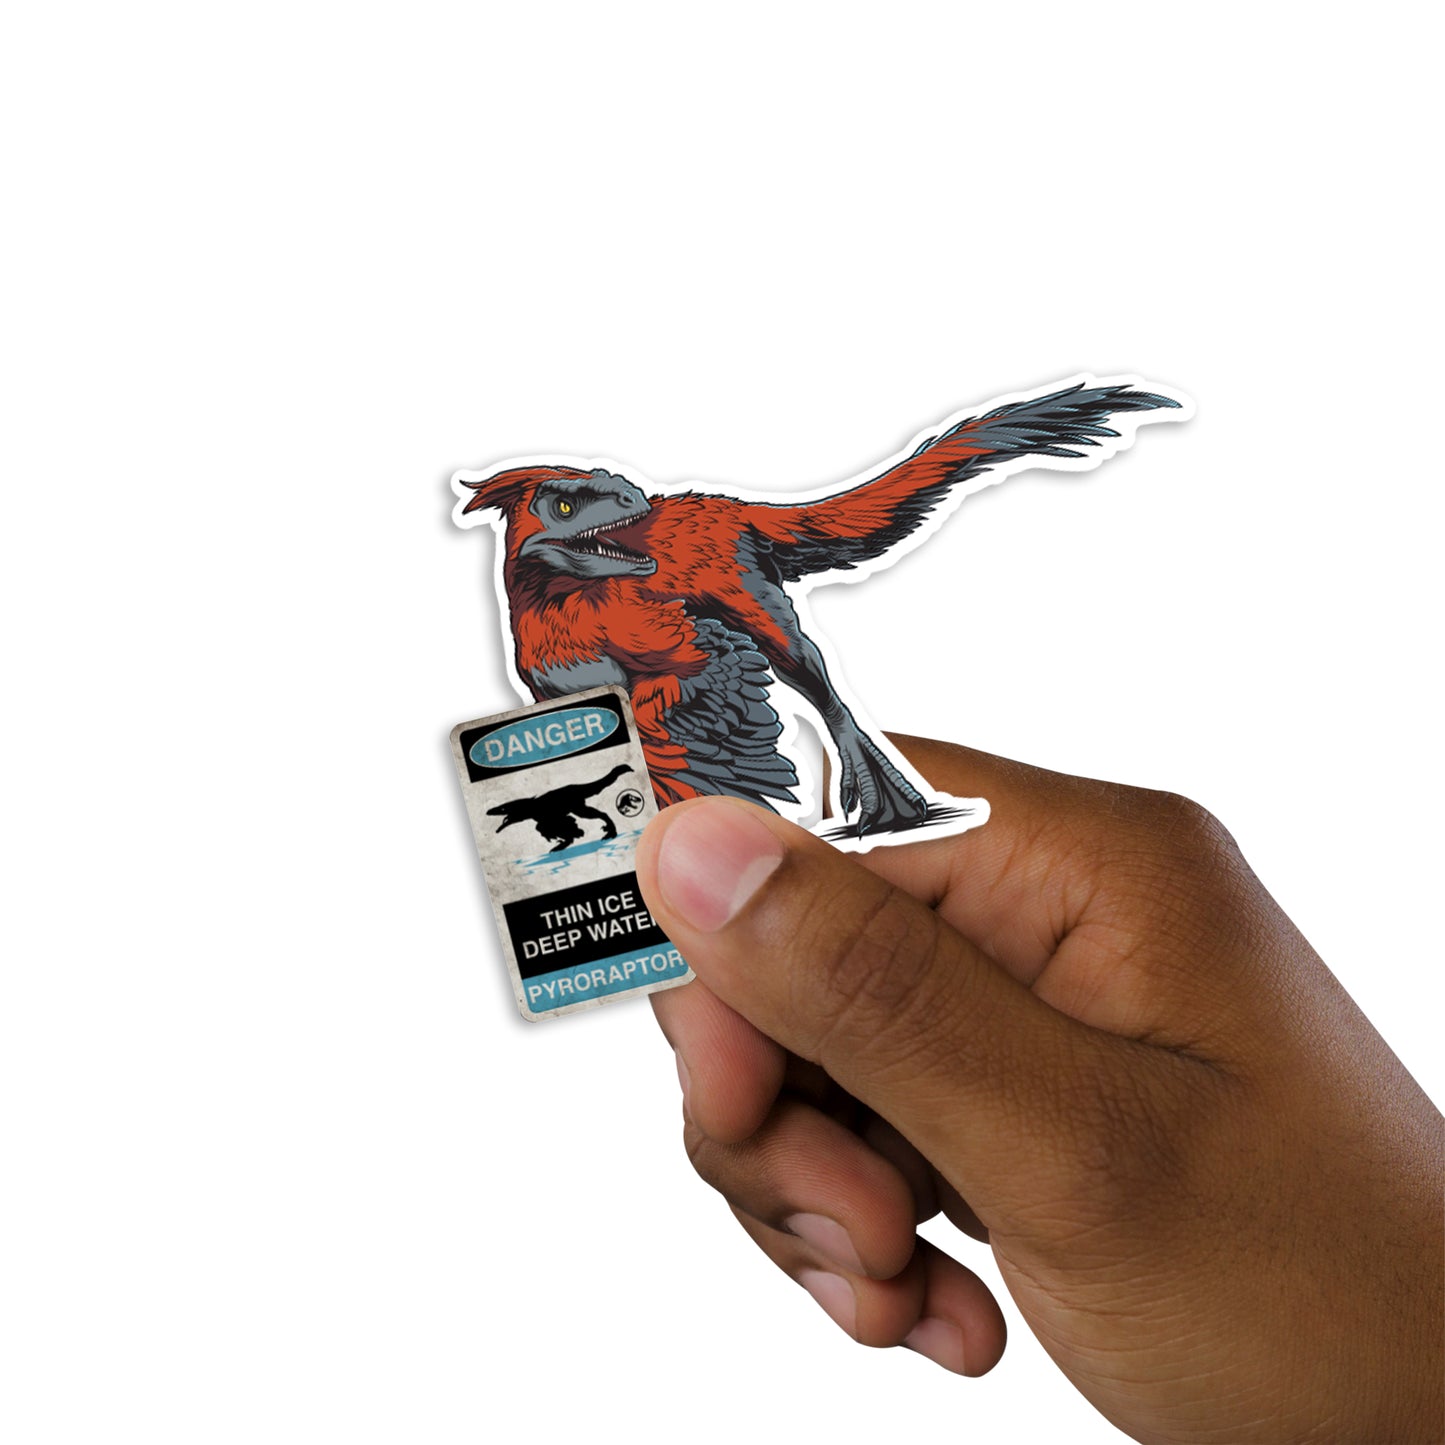 Sheet of 5 -Jurassic World Dominion: Pyroraptor Minis        - Officially Licensed NBC Universal Removable     Adhesive Decal